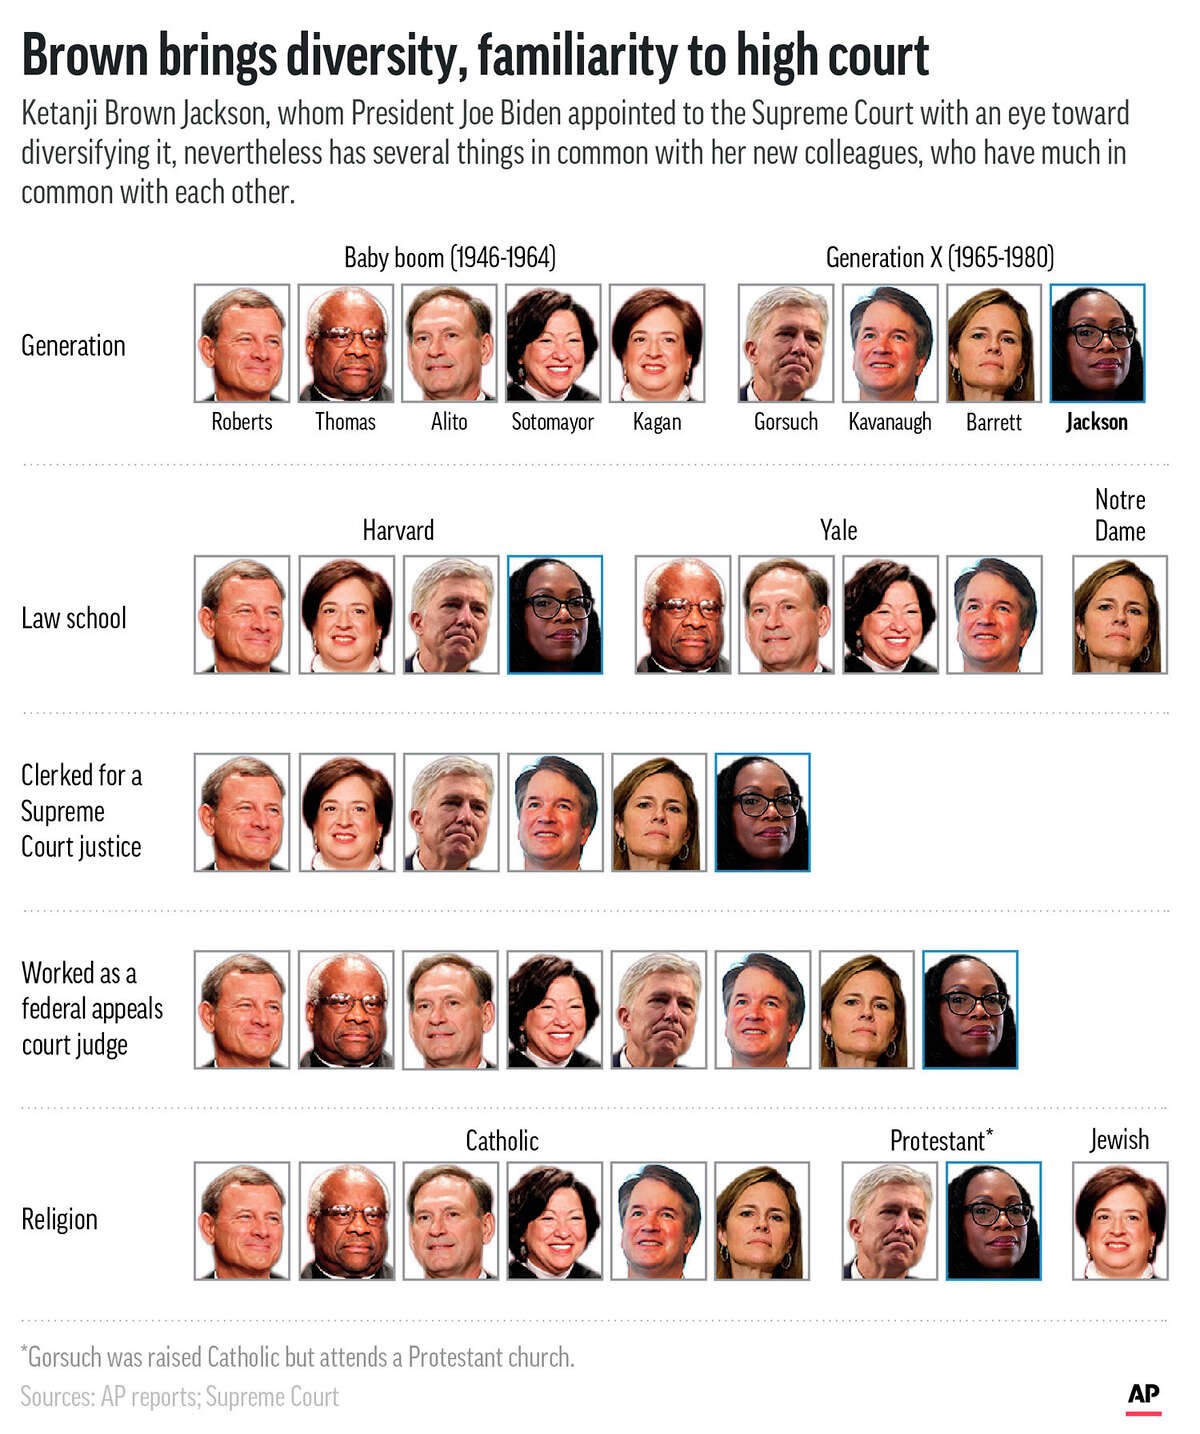 The Supreme Court's newest member, Ketanji Brown Jackson, has much in common with her future colleagues. (AP Graphic)